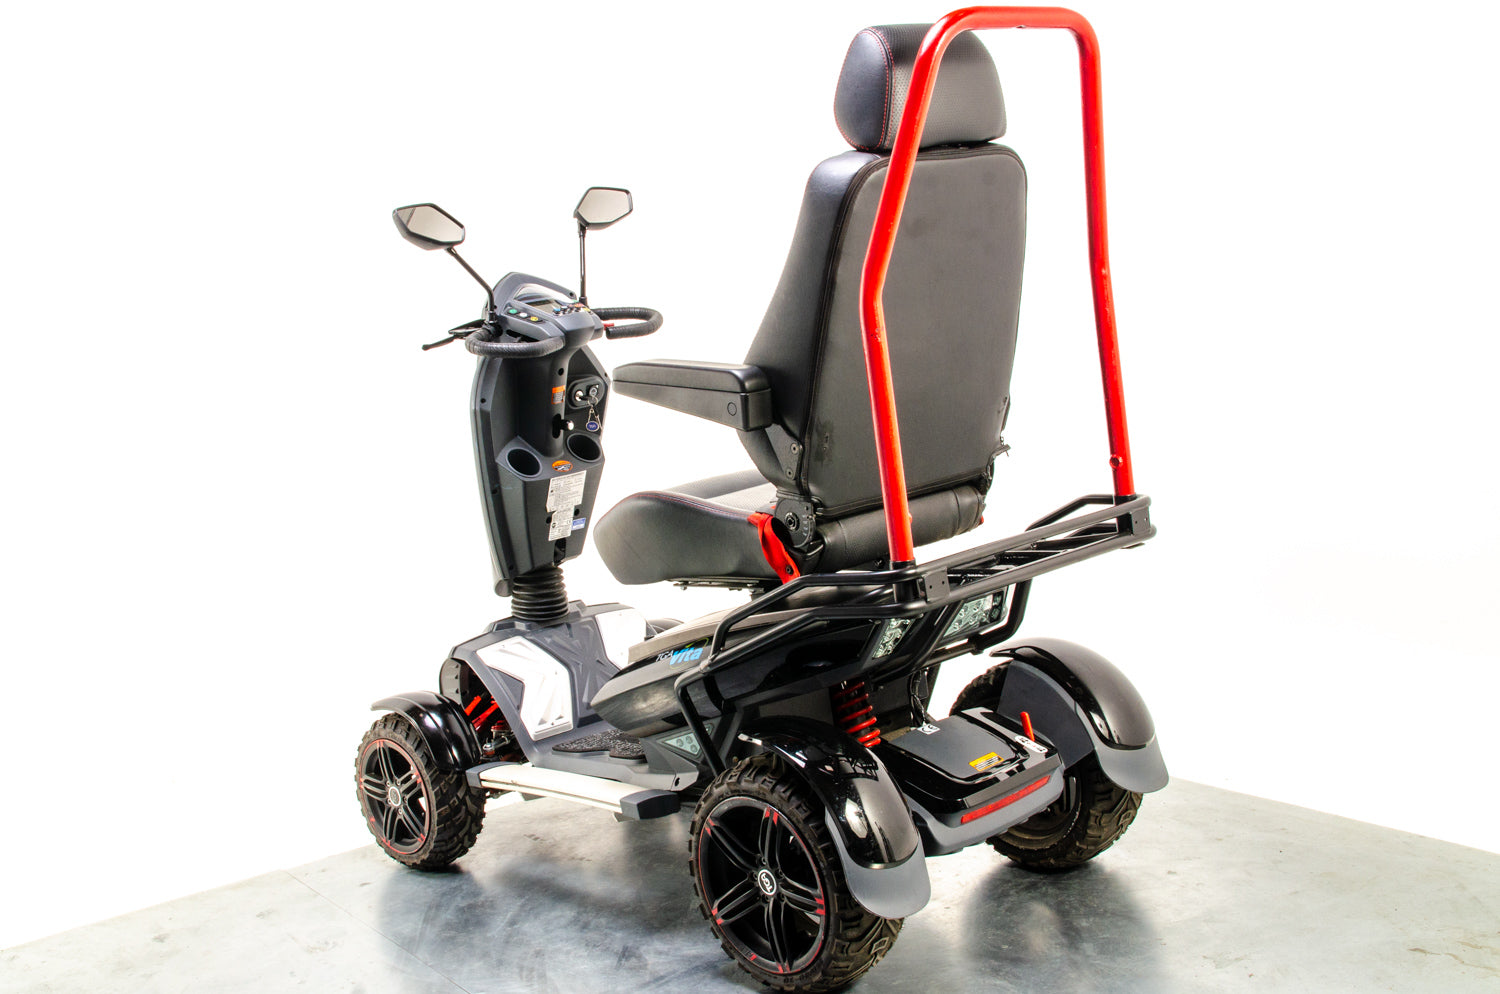 TGA Vita X Used Mobility Scooter 8mph All-Terrain Off-Road Large Road Legal 13353